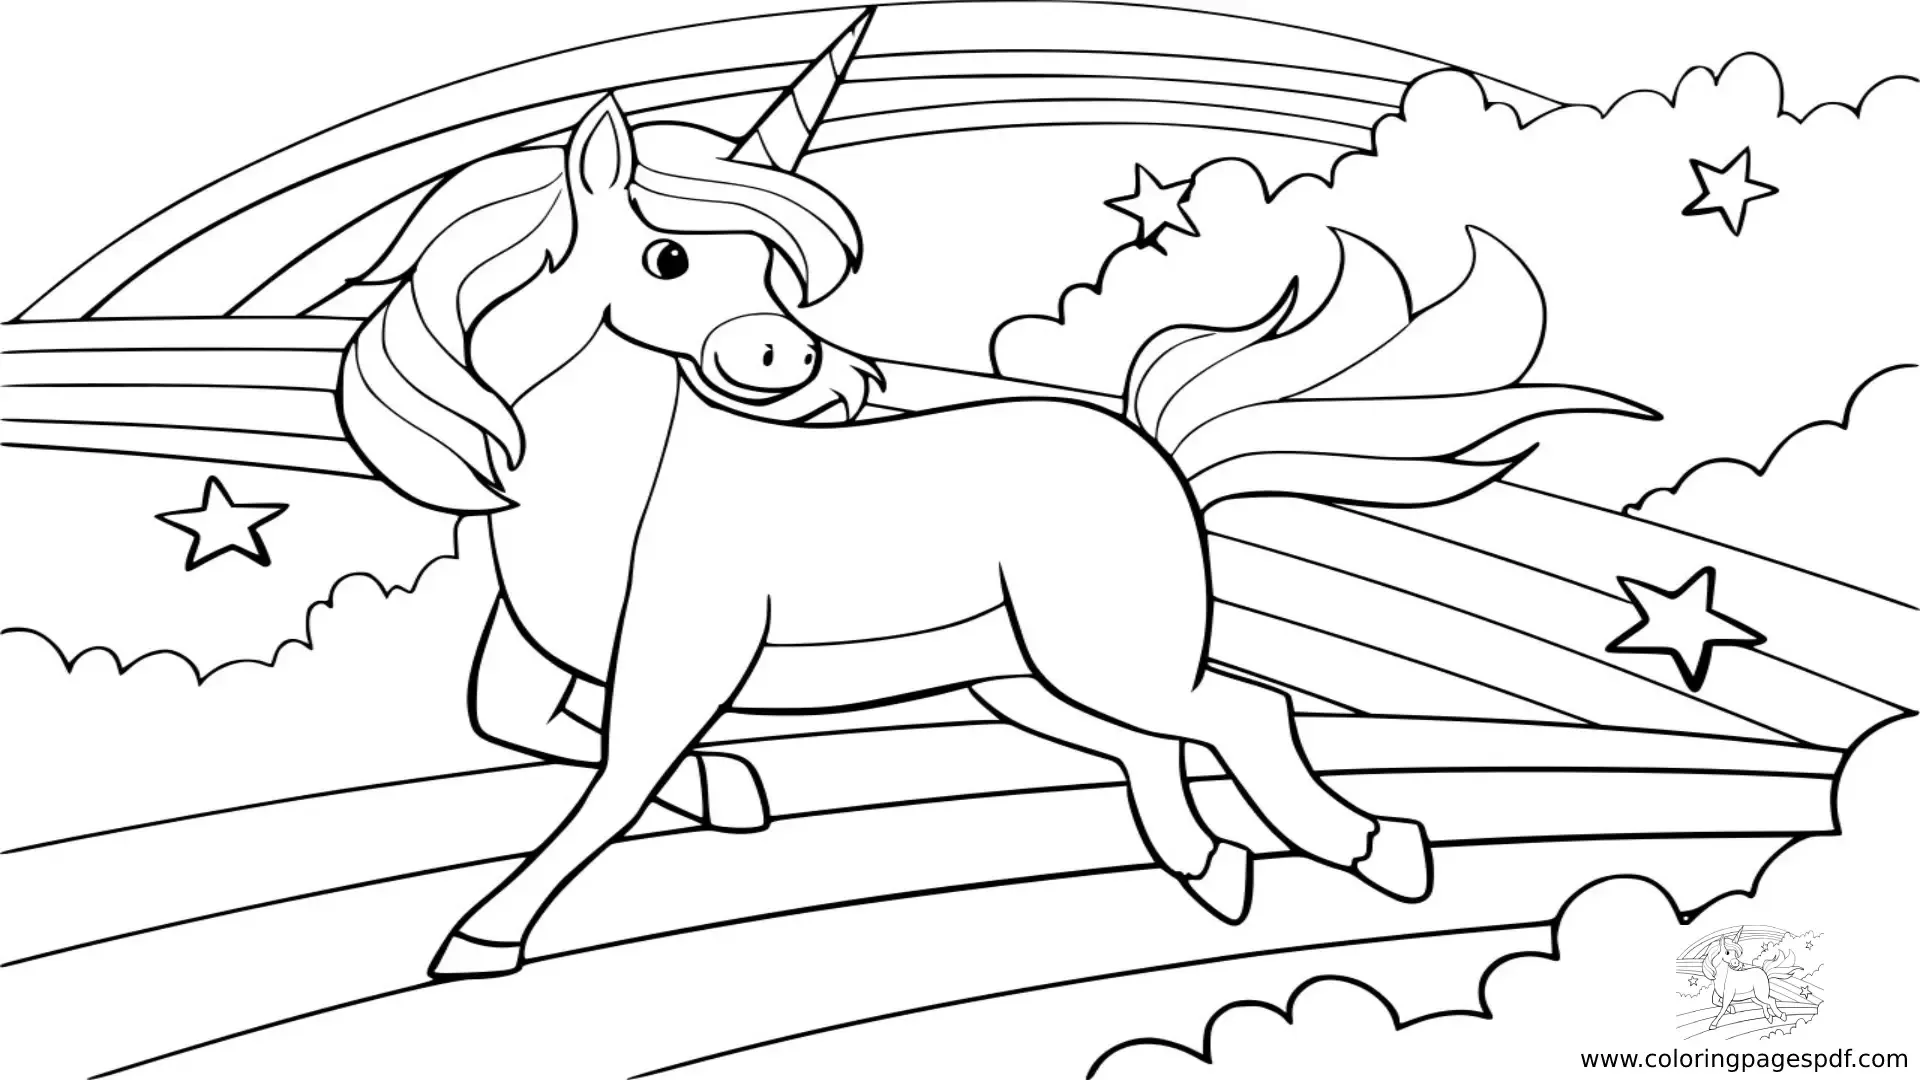 Unicorn Coloring Pages Online